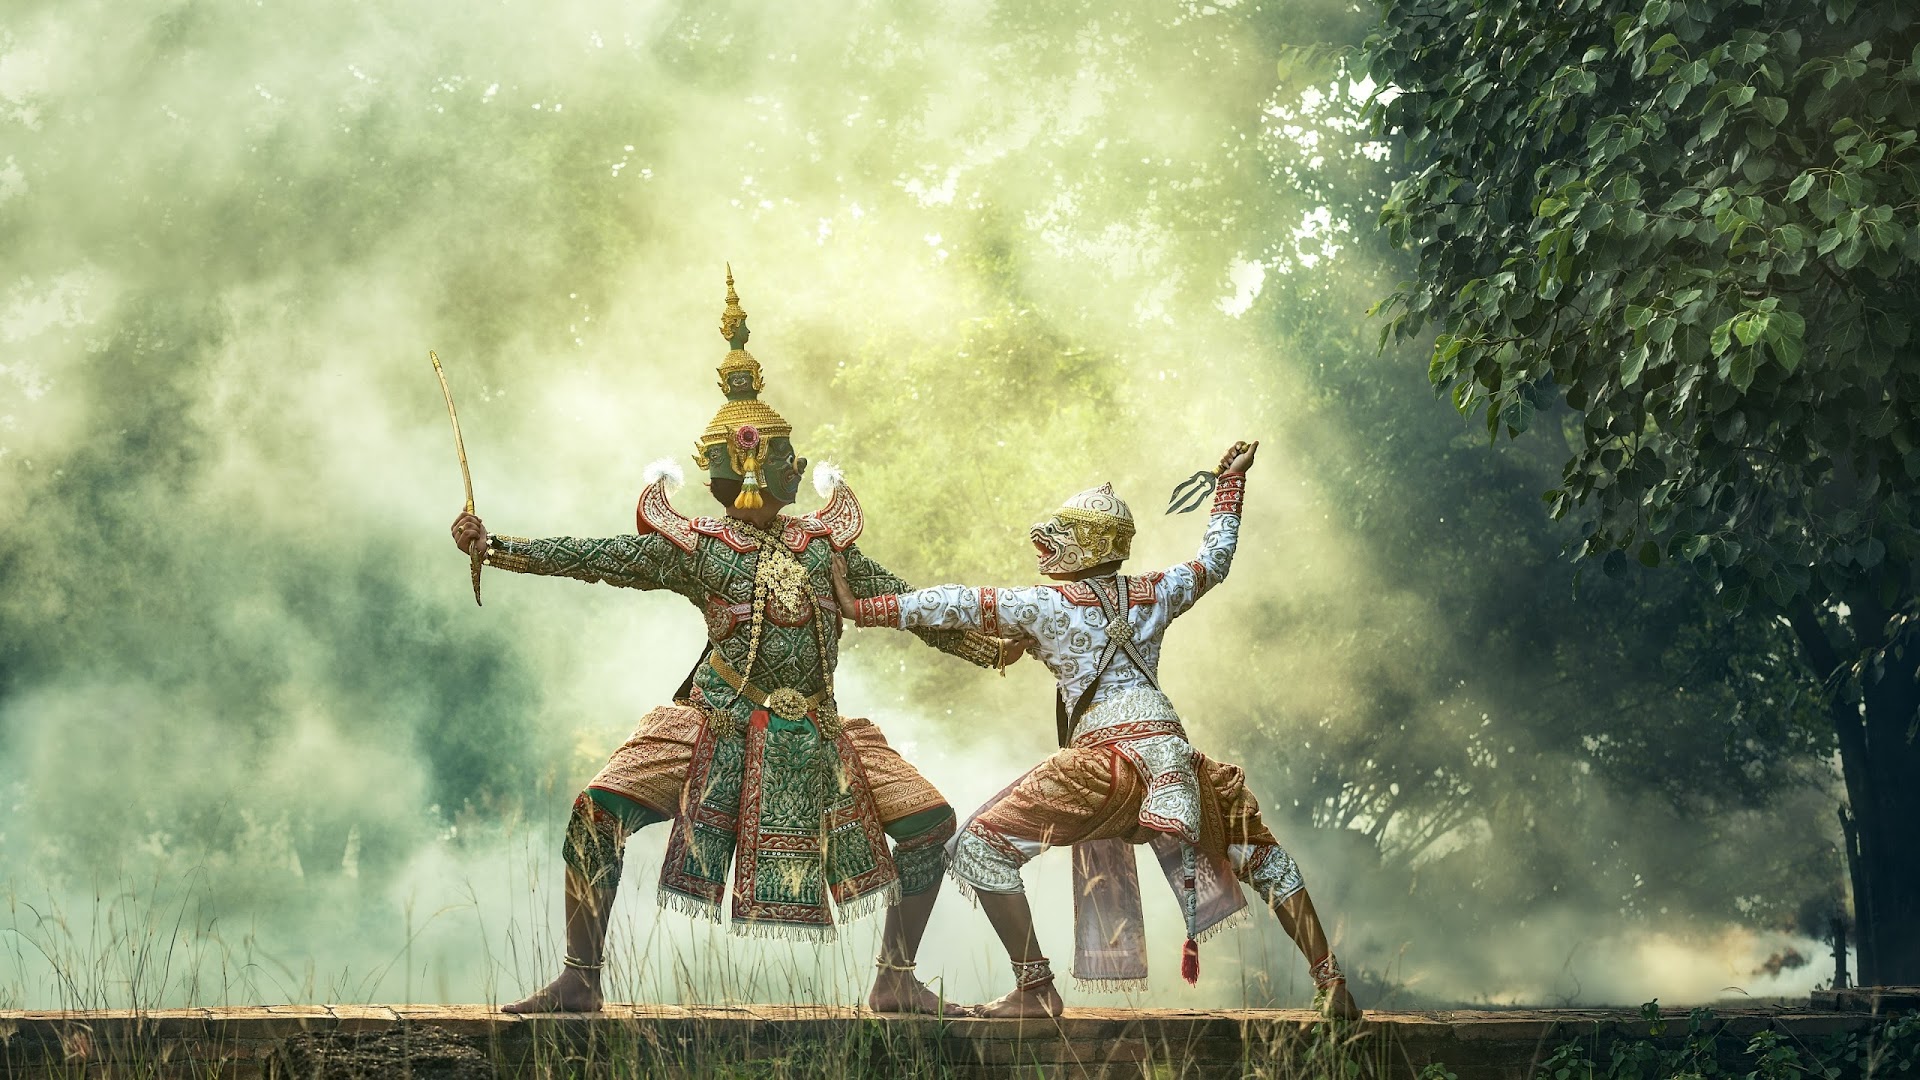 The Khon, is a traditional masked dance HD Wallpaper